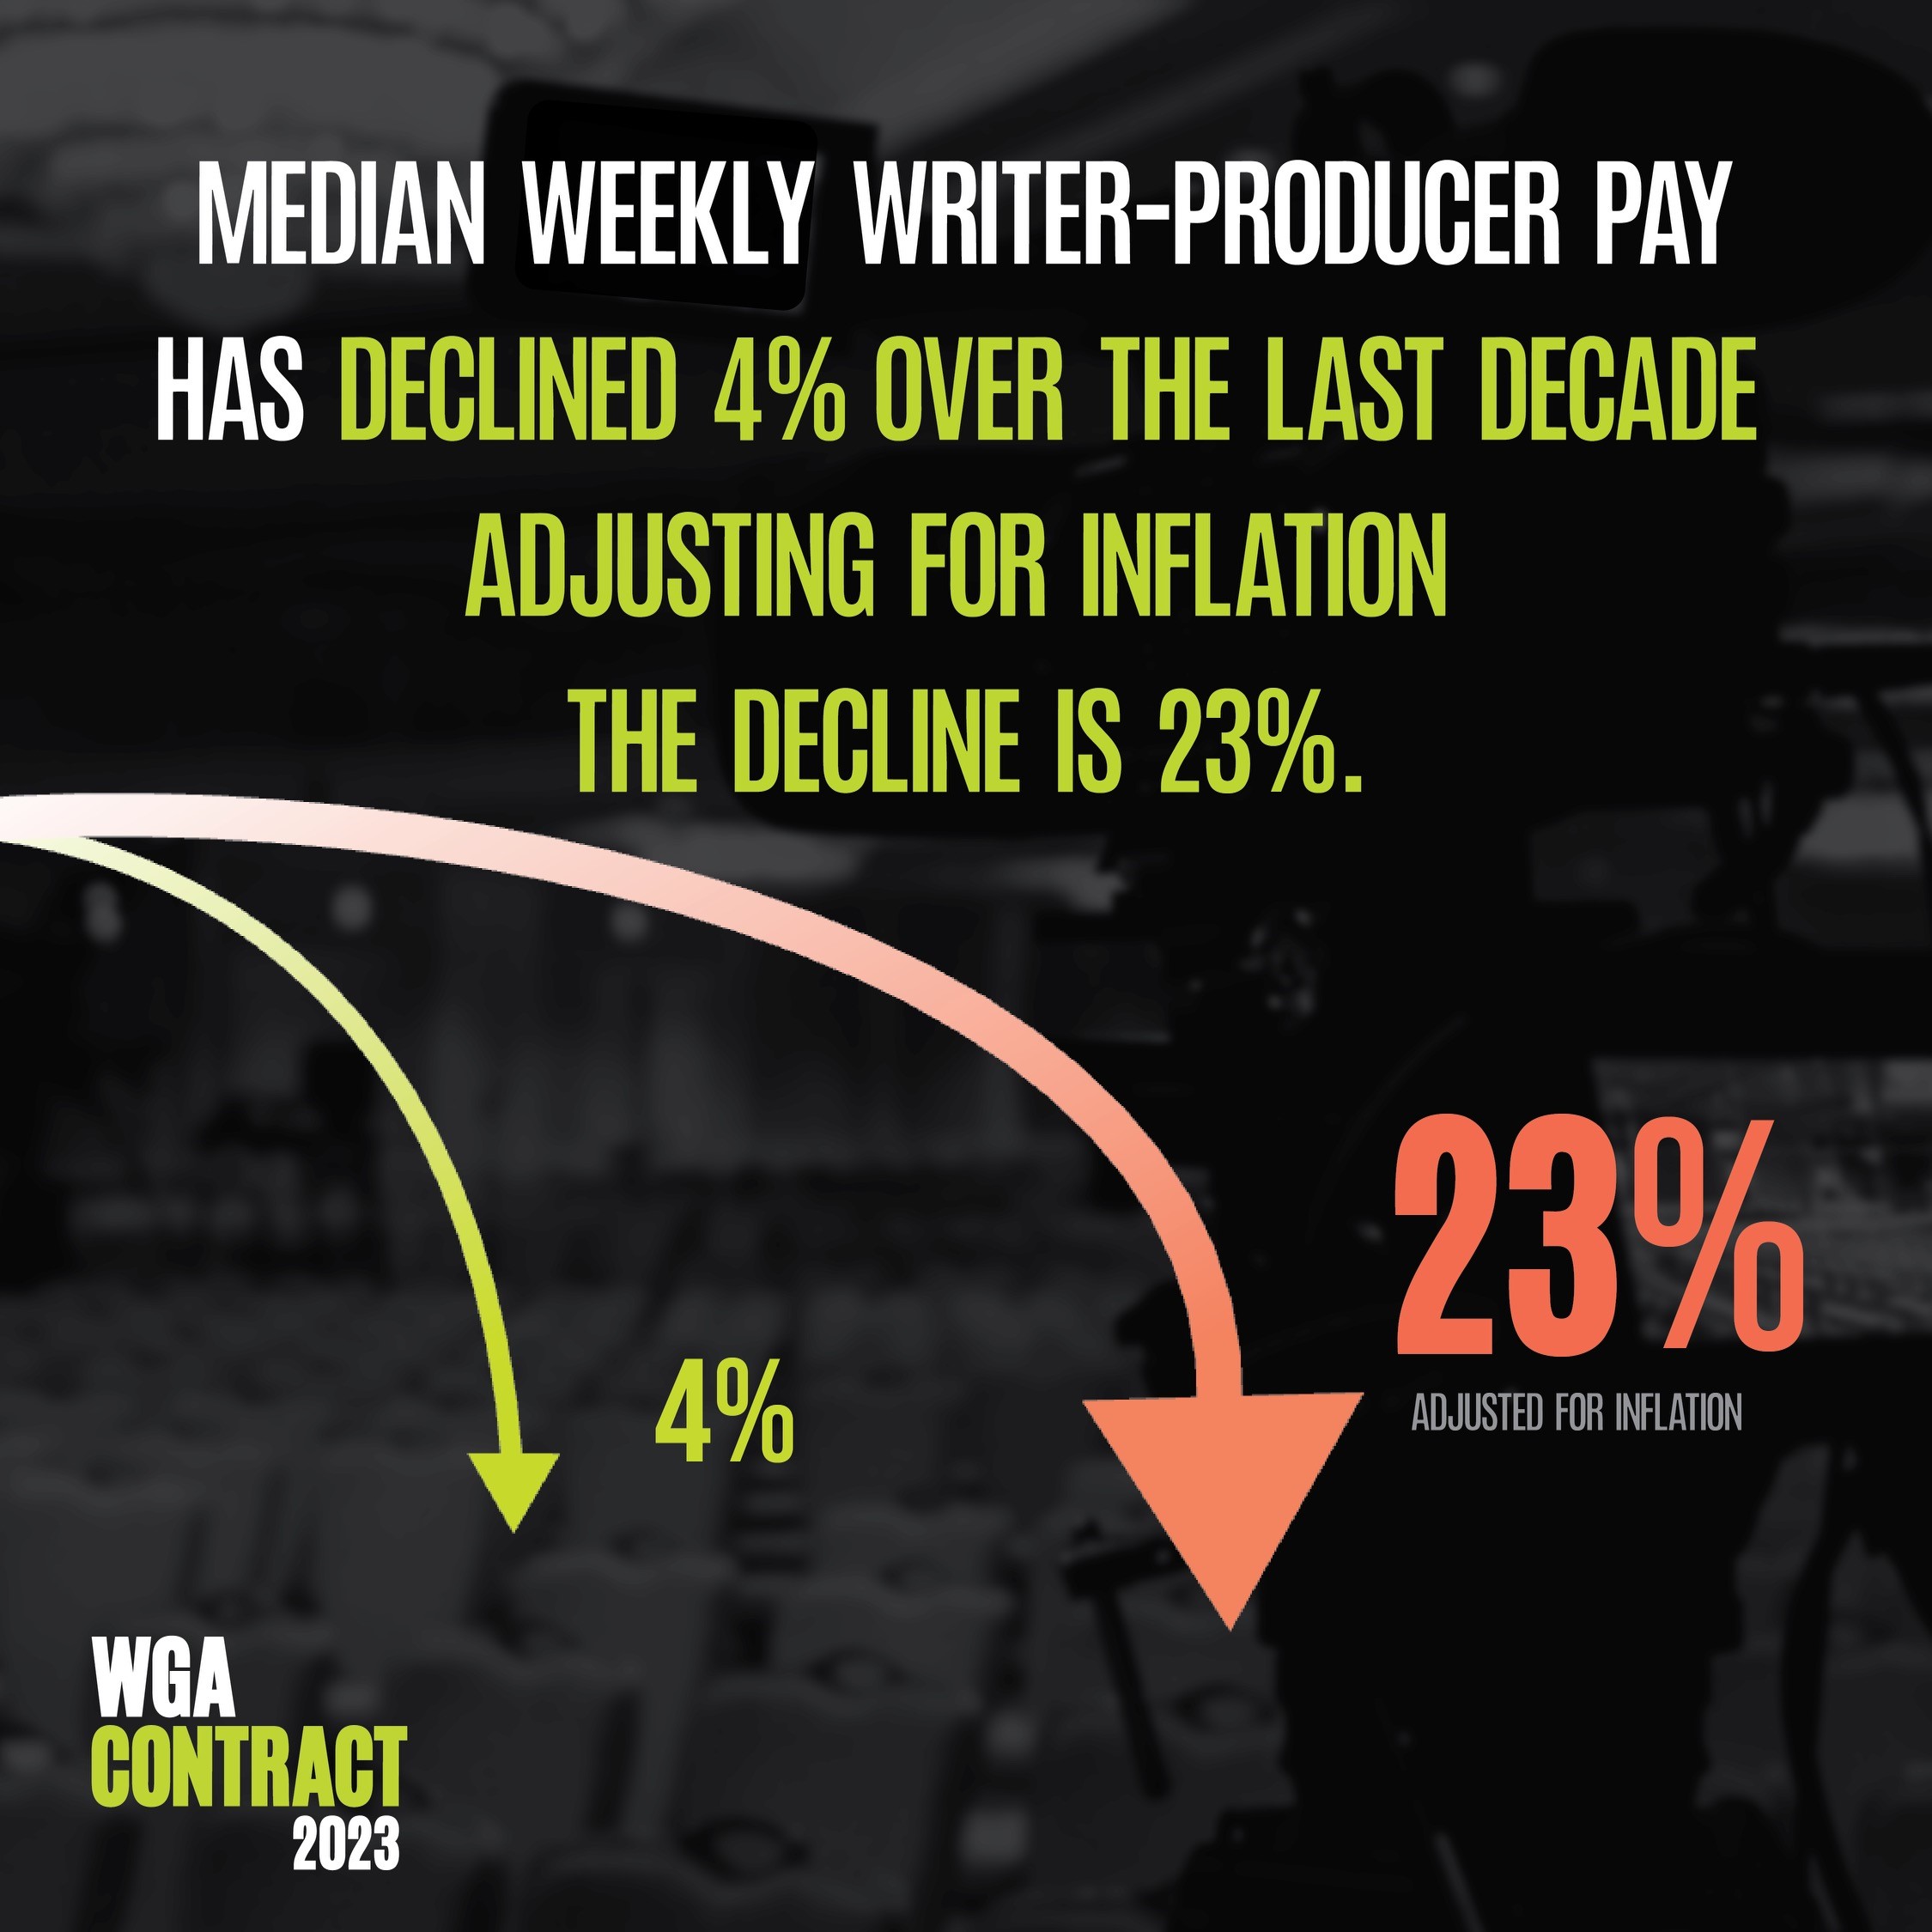 Median Weekly Writer-Producer Pay Has Declined 4% over the last decade. Adjusting for inflation the decline is 23%. 